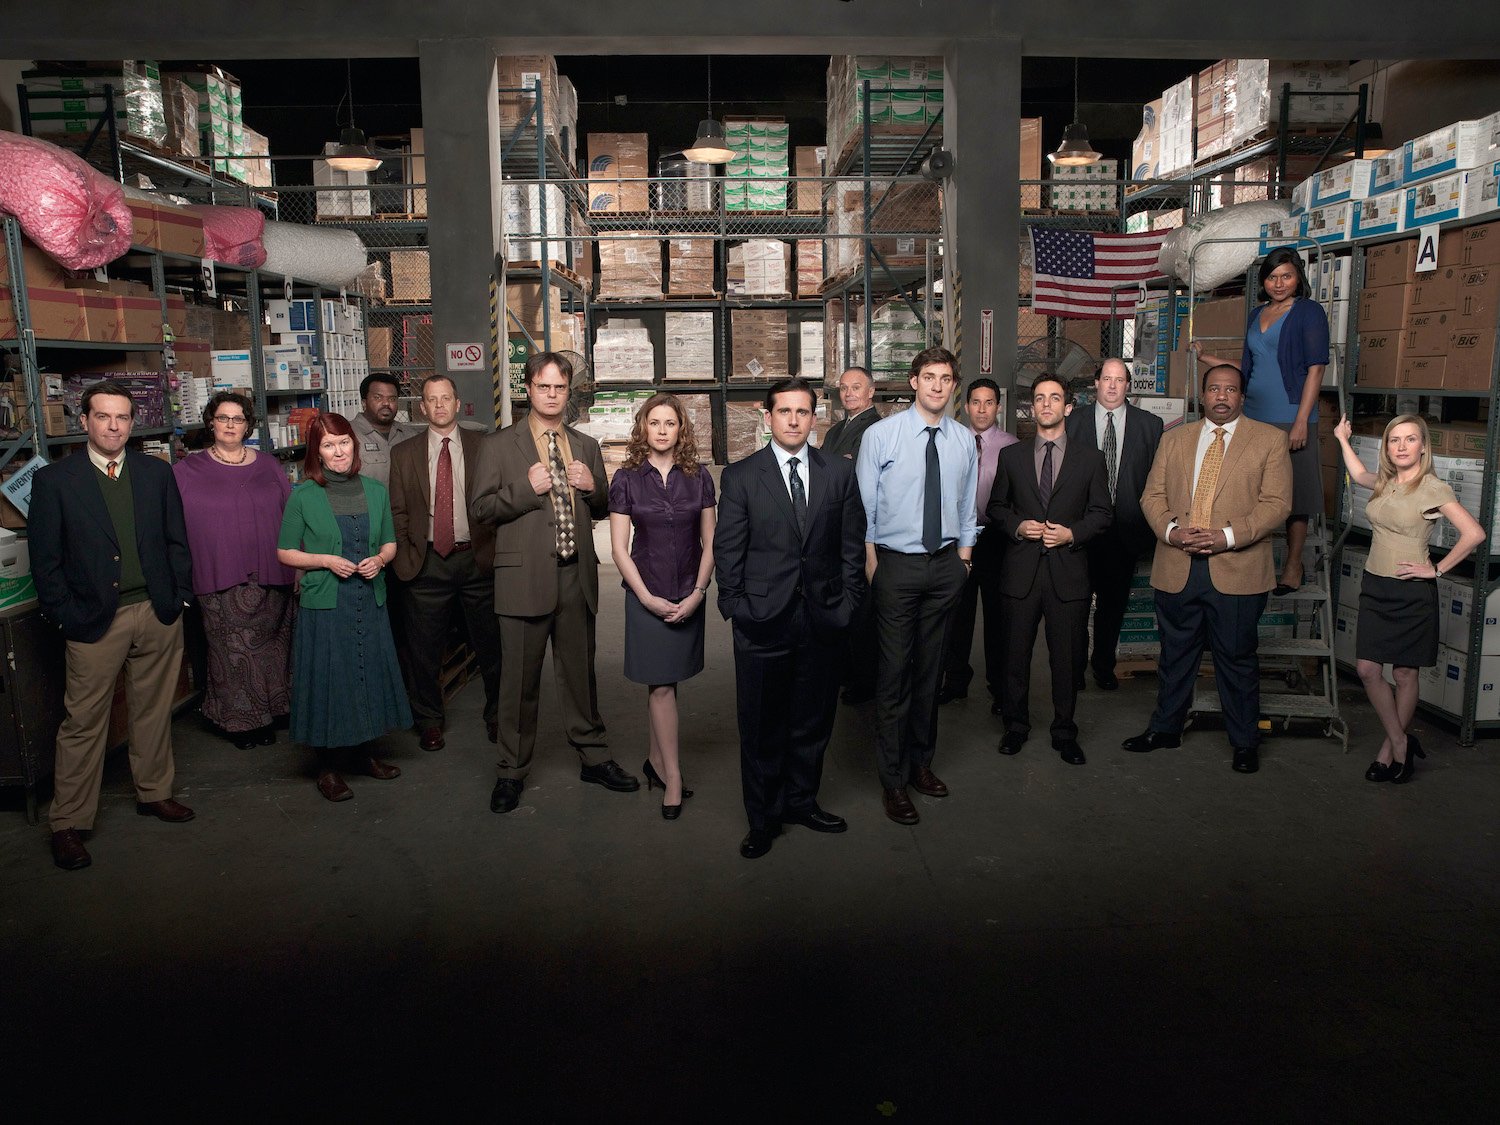 John Krasinski, Jenna Fischer, and the cast of 'The Office' in character posing in the warehouse